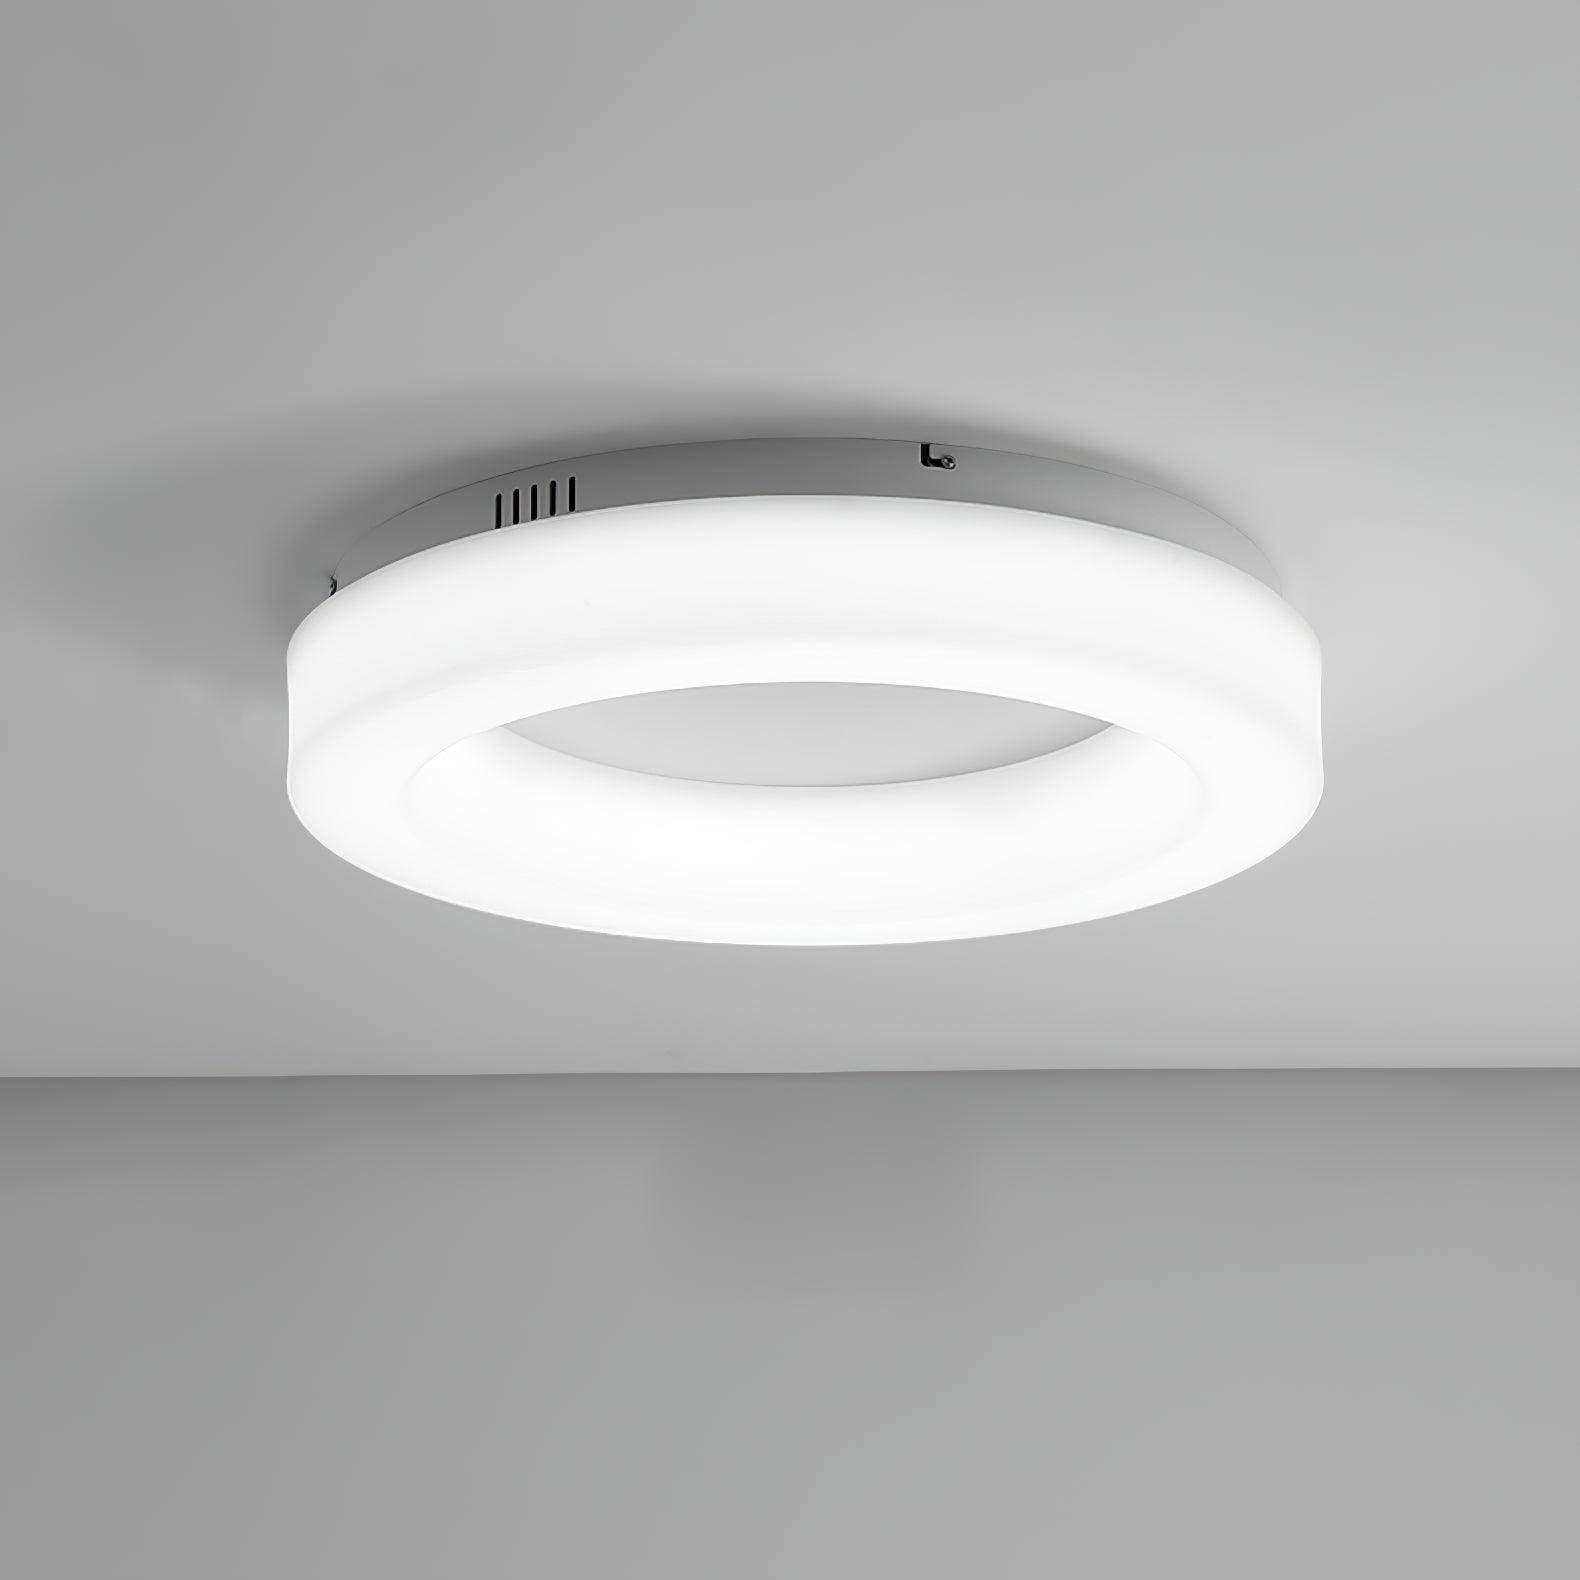 Ceiling Light Fixture - 22.8" Diameter x 5.9" Height, 58cm Dia x 15cm H, in White with Cool Light